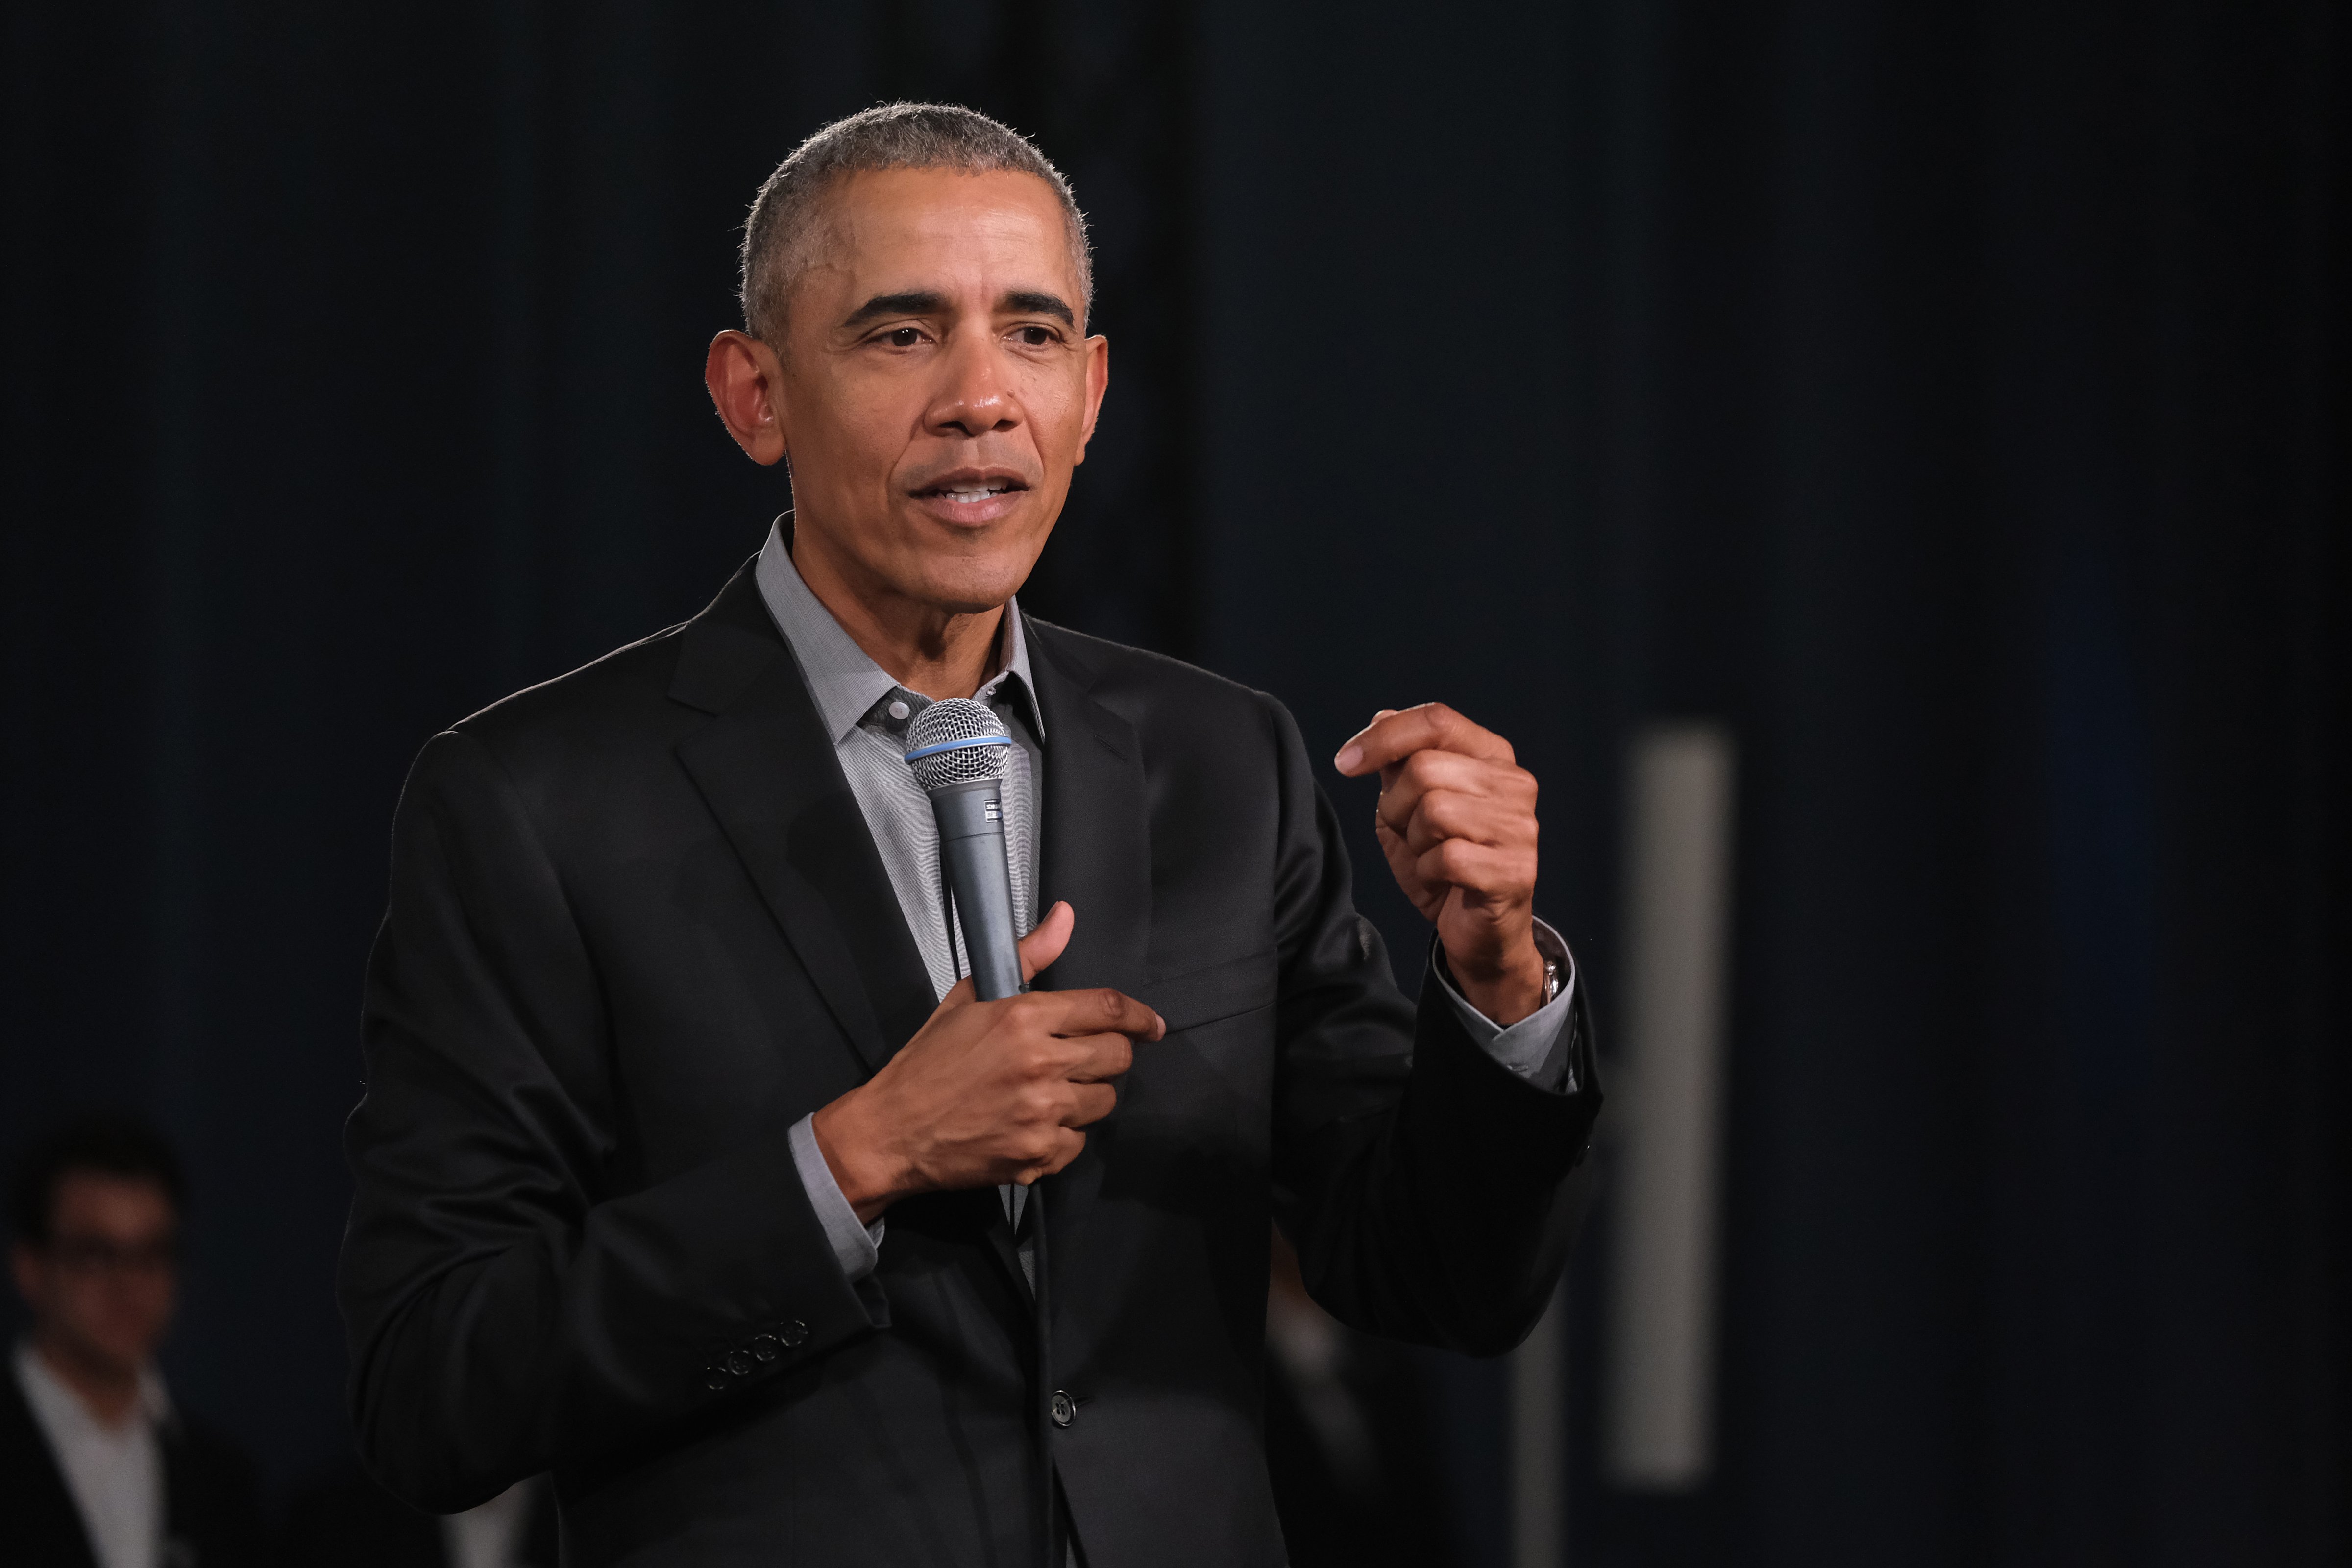 Former U.S. President Barack Obama speaks to young leaders from across Europe in a Town Hall-styled session on April 06, 2019 in Berlin, Germany. (Sean Gallup&mdash;Getty Images)